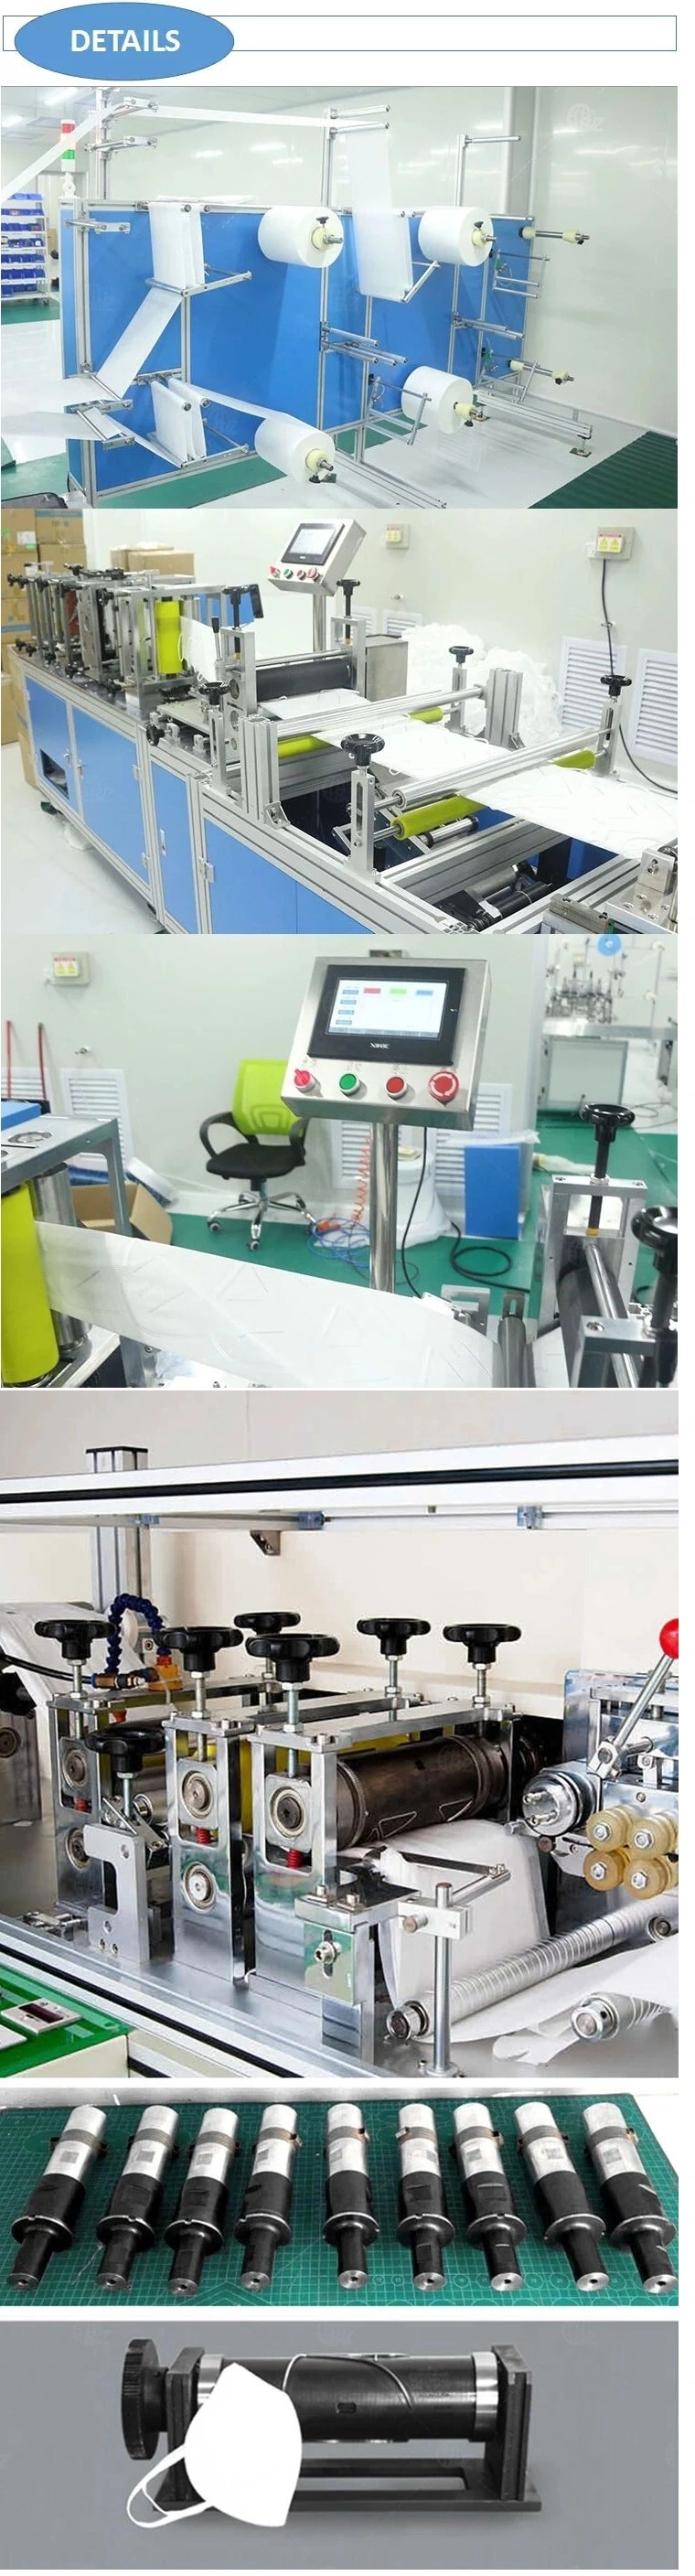 Face Mask Production Line to Produce KN95 Face Mask